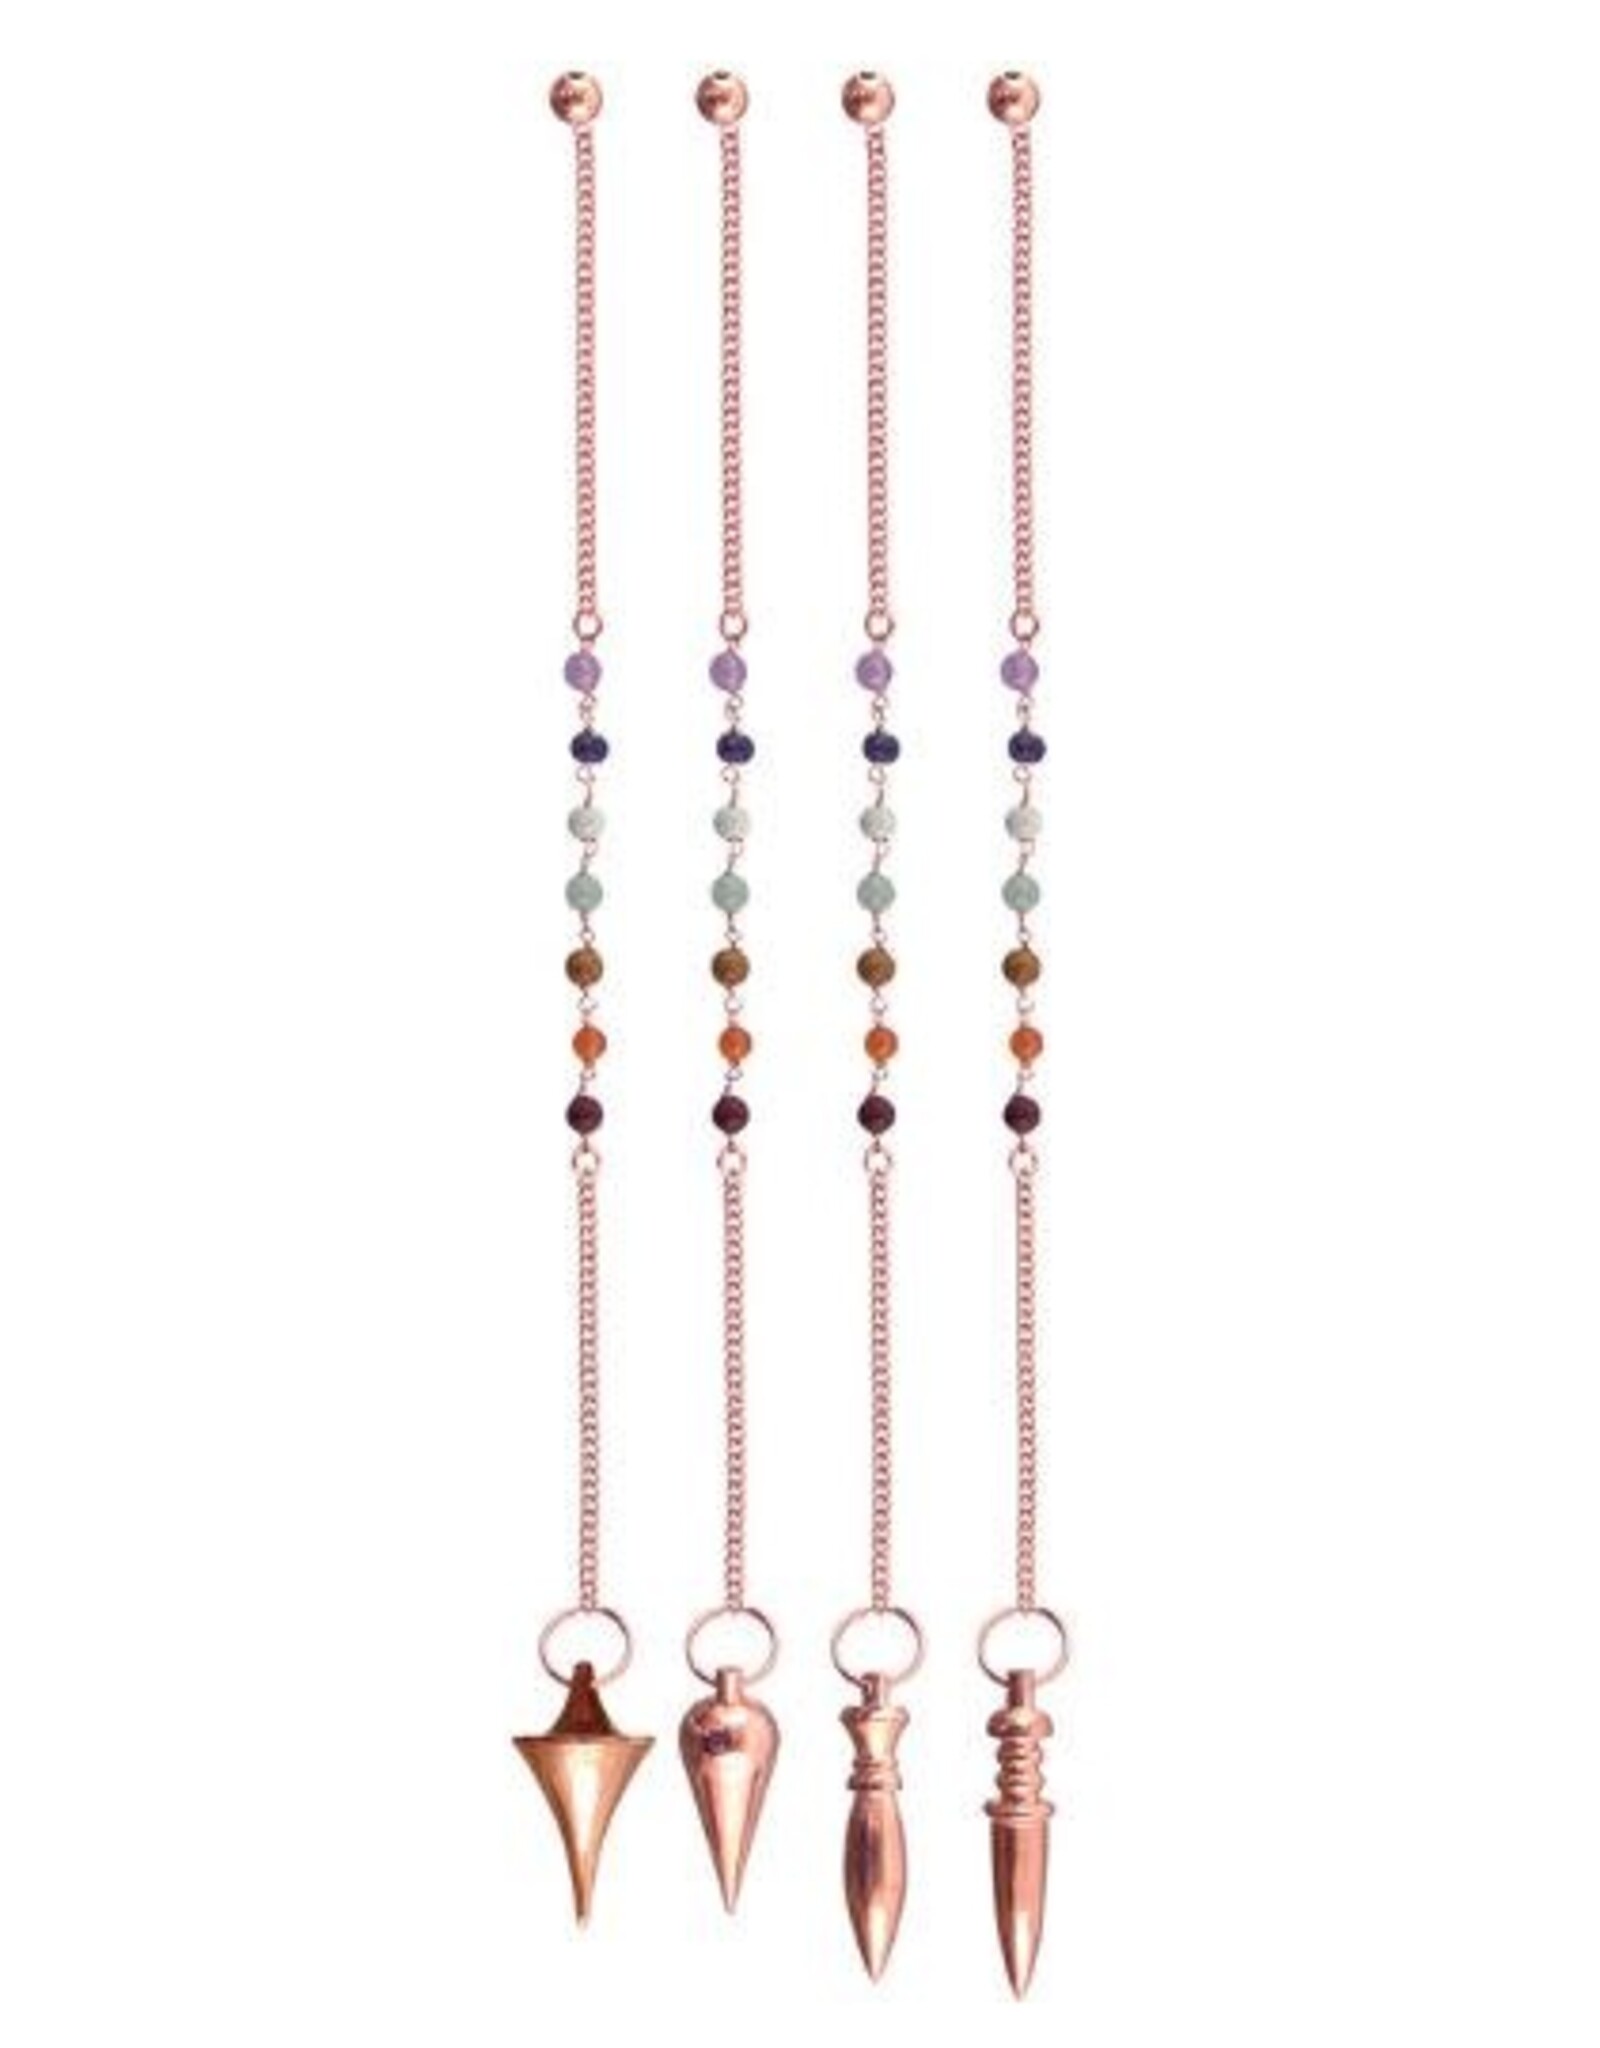 Assorted Copper Colour Metal Pendulums with Chakra Beads